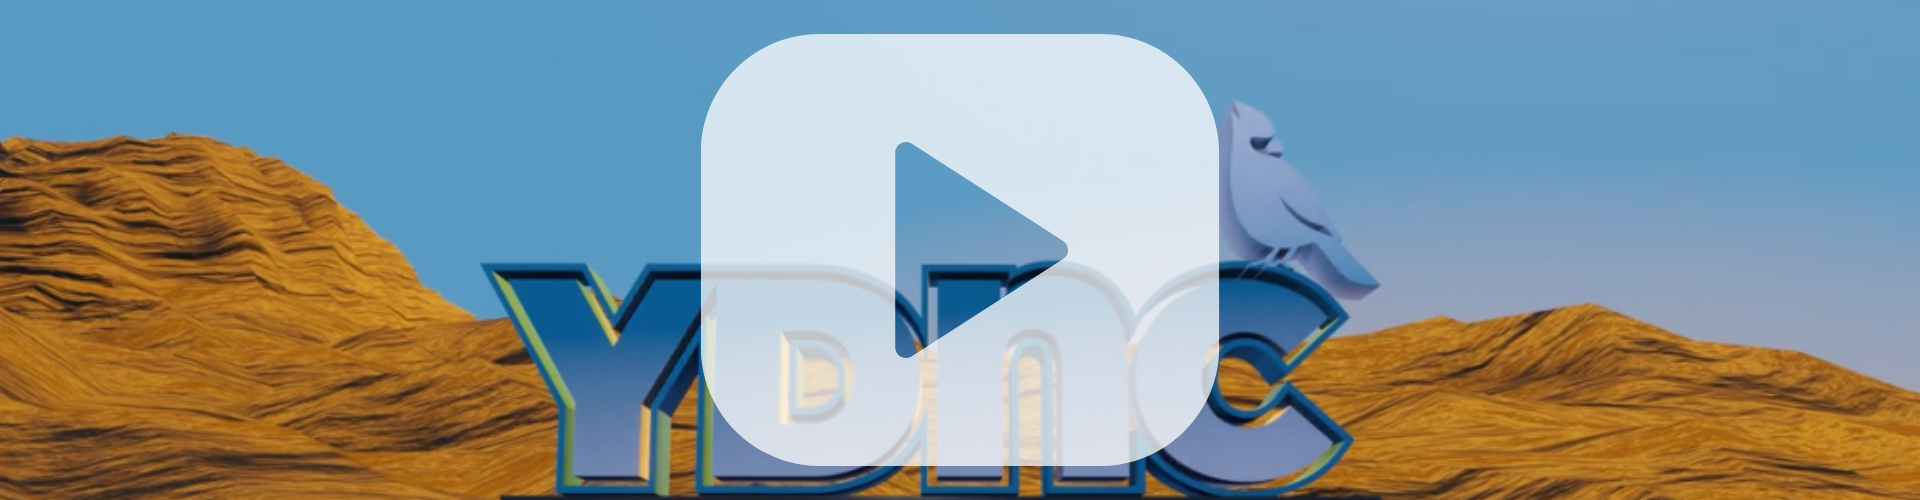 A screenshot of a YouTube video showing the YDNC Logo on a pedestal in a rocky landscape.